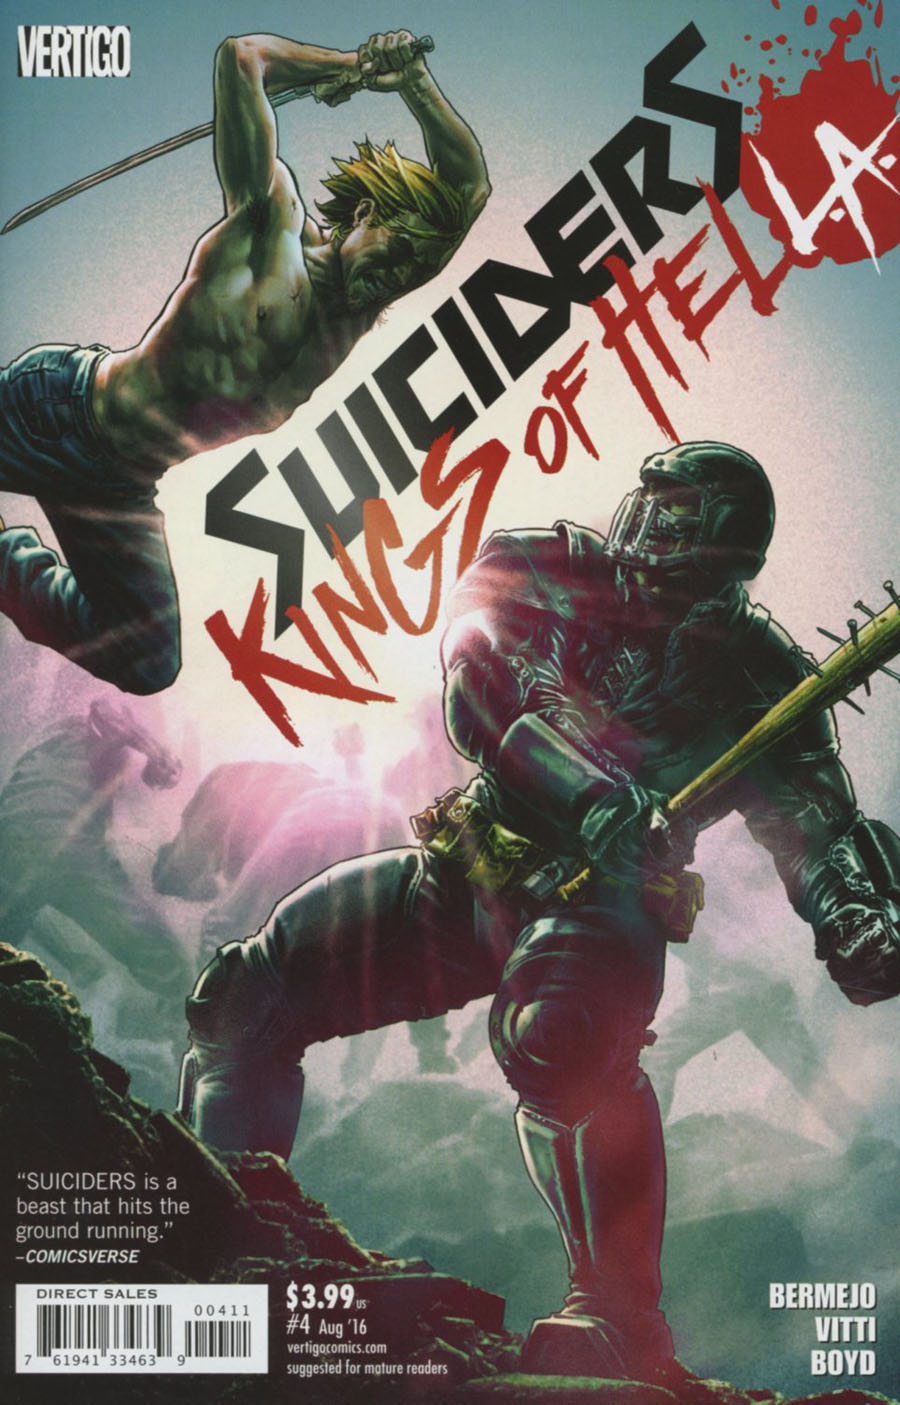 Suiciders Kings Of HelL.A. #4